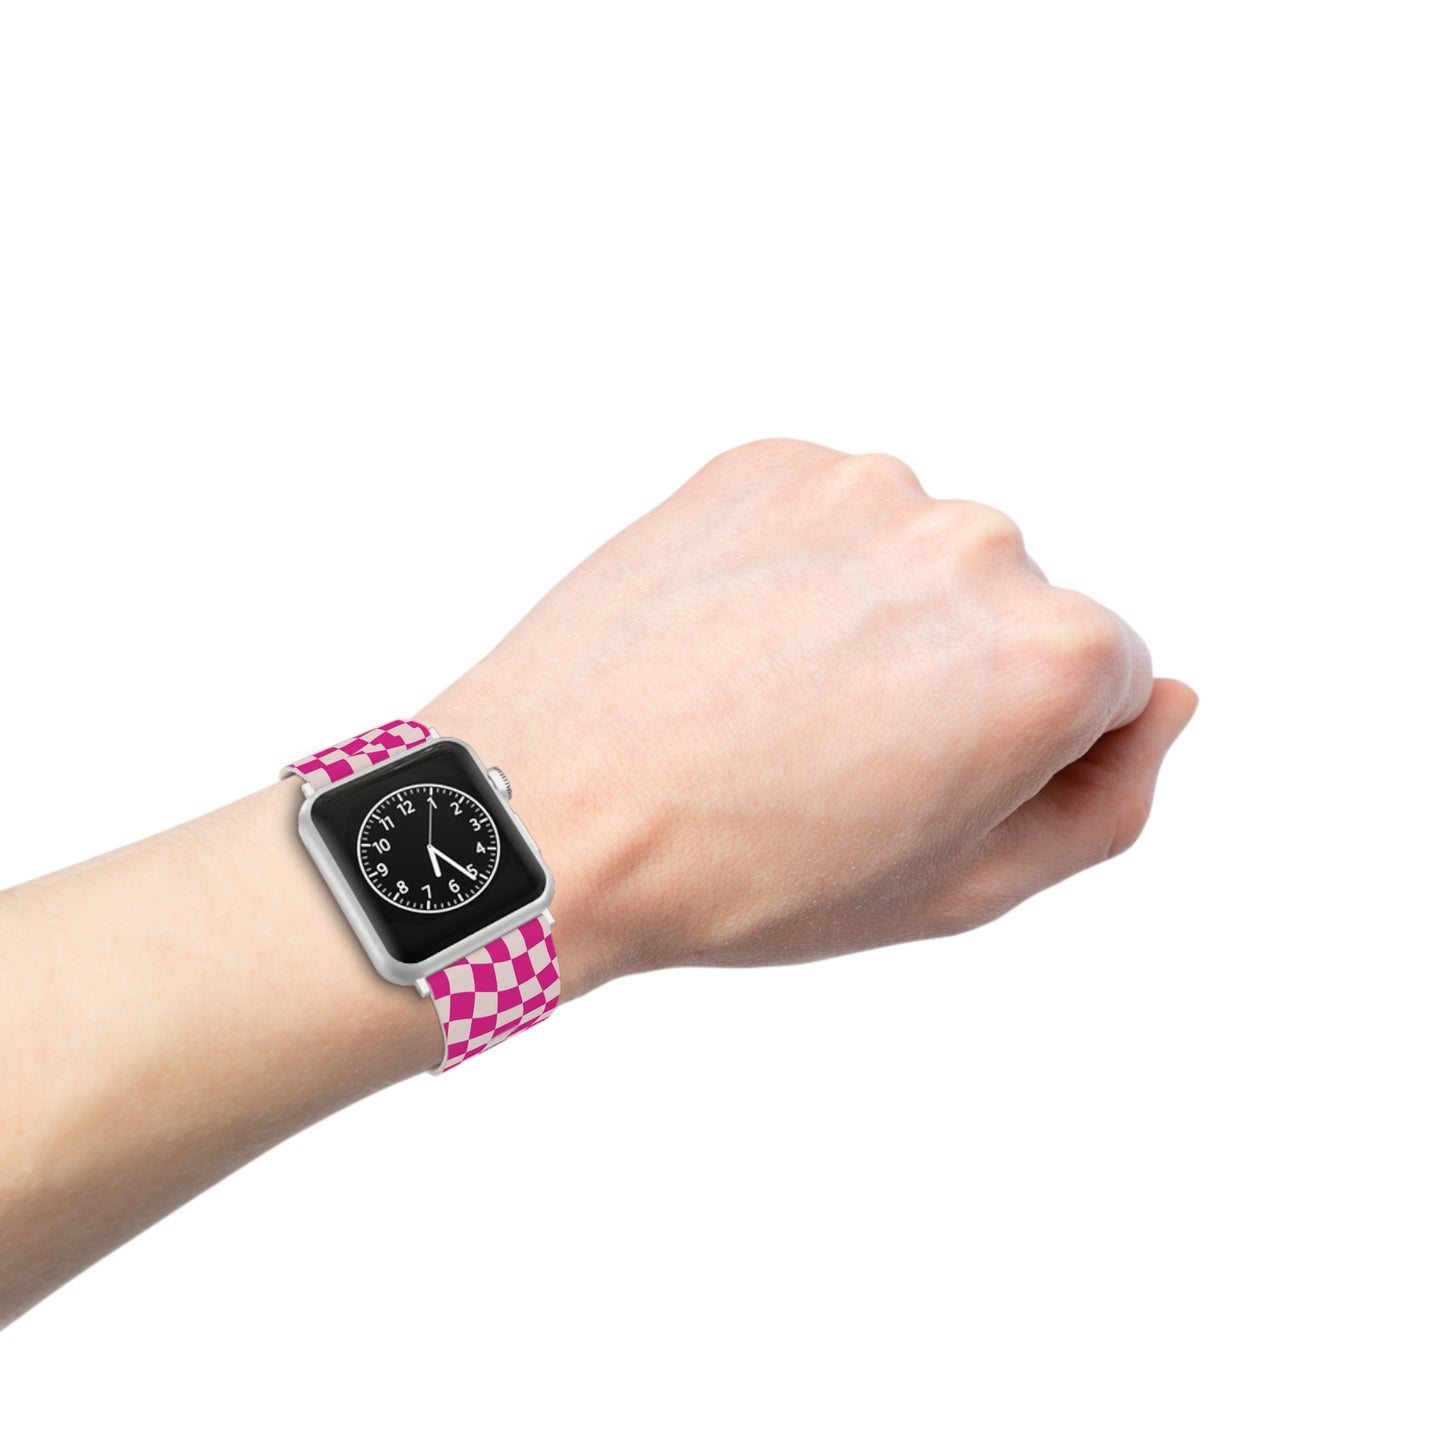 Hot Pink and Light Pink Wavy Checkers Apple Watch Band